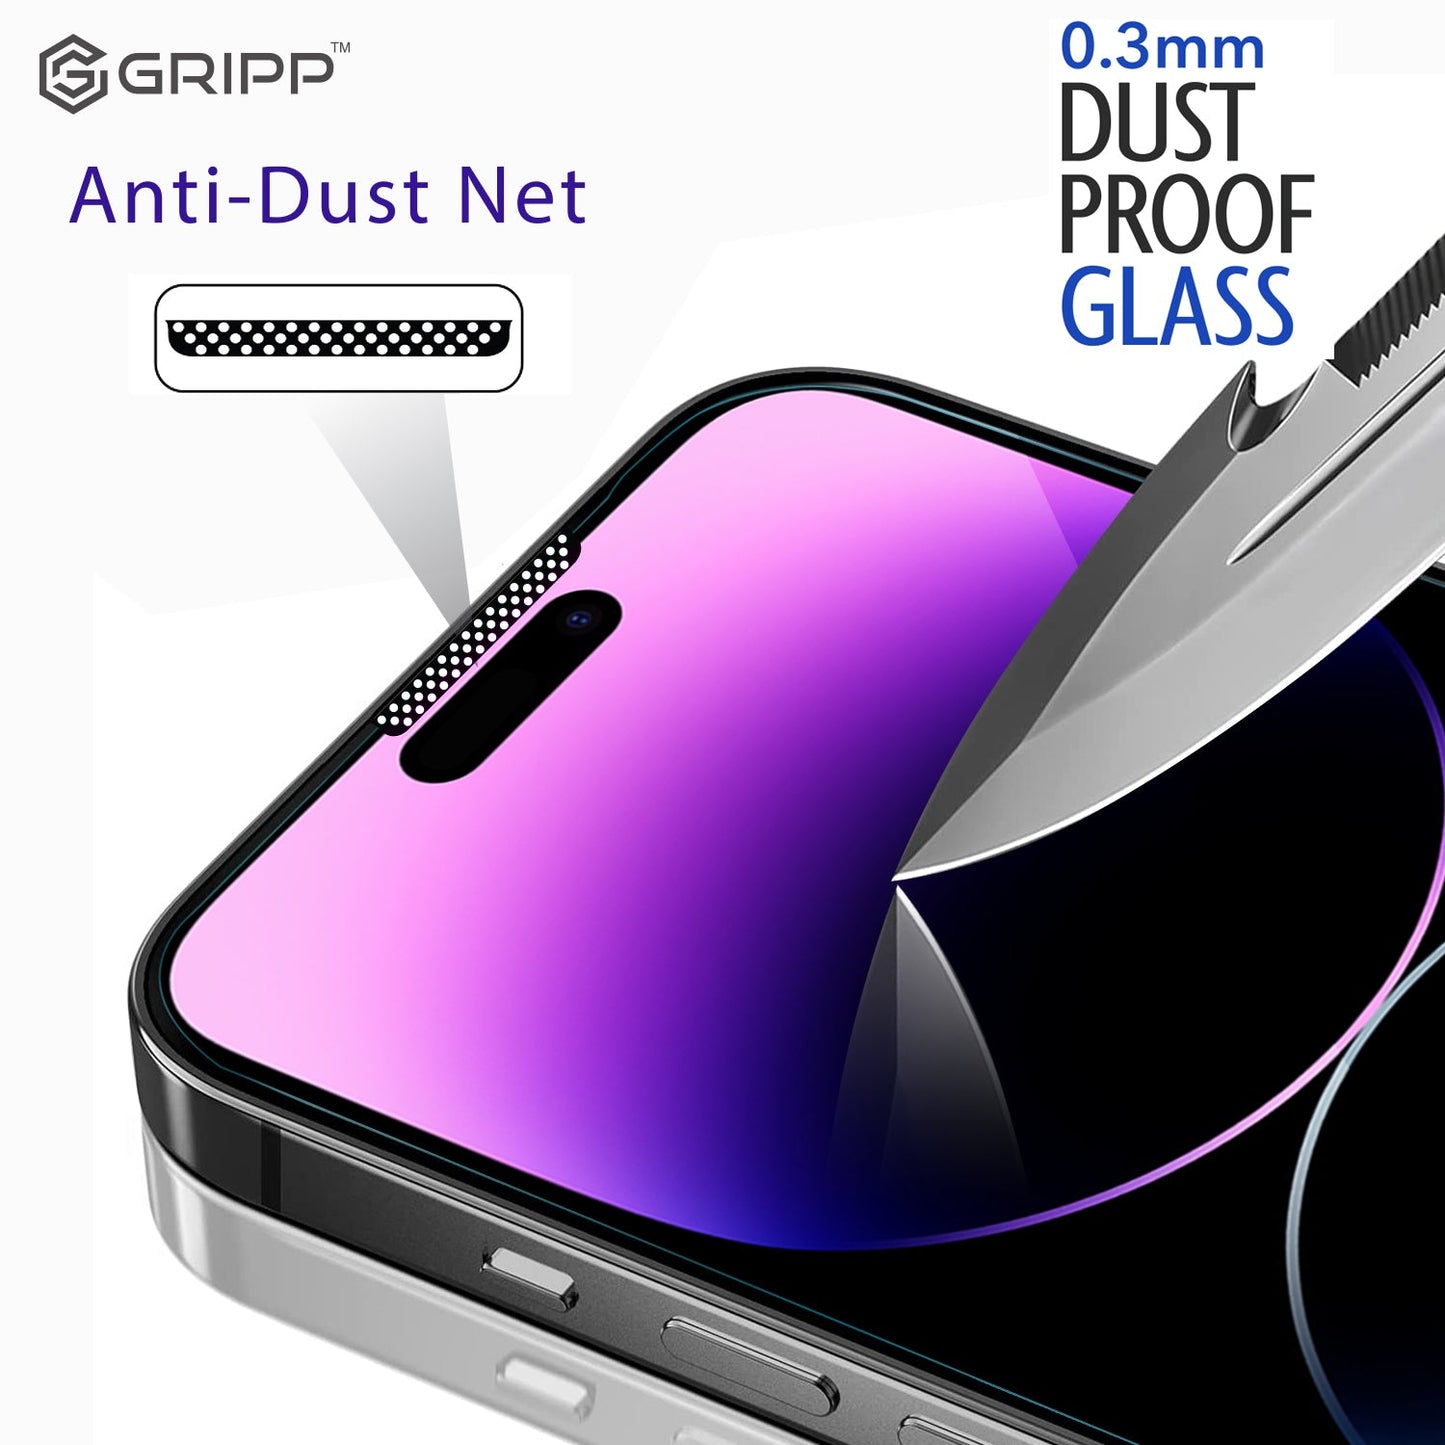 Gripp Dust Proof Tempered Glass 0.3mm For Apple Iphone 14 Pro Max (6.7") - Clear